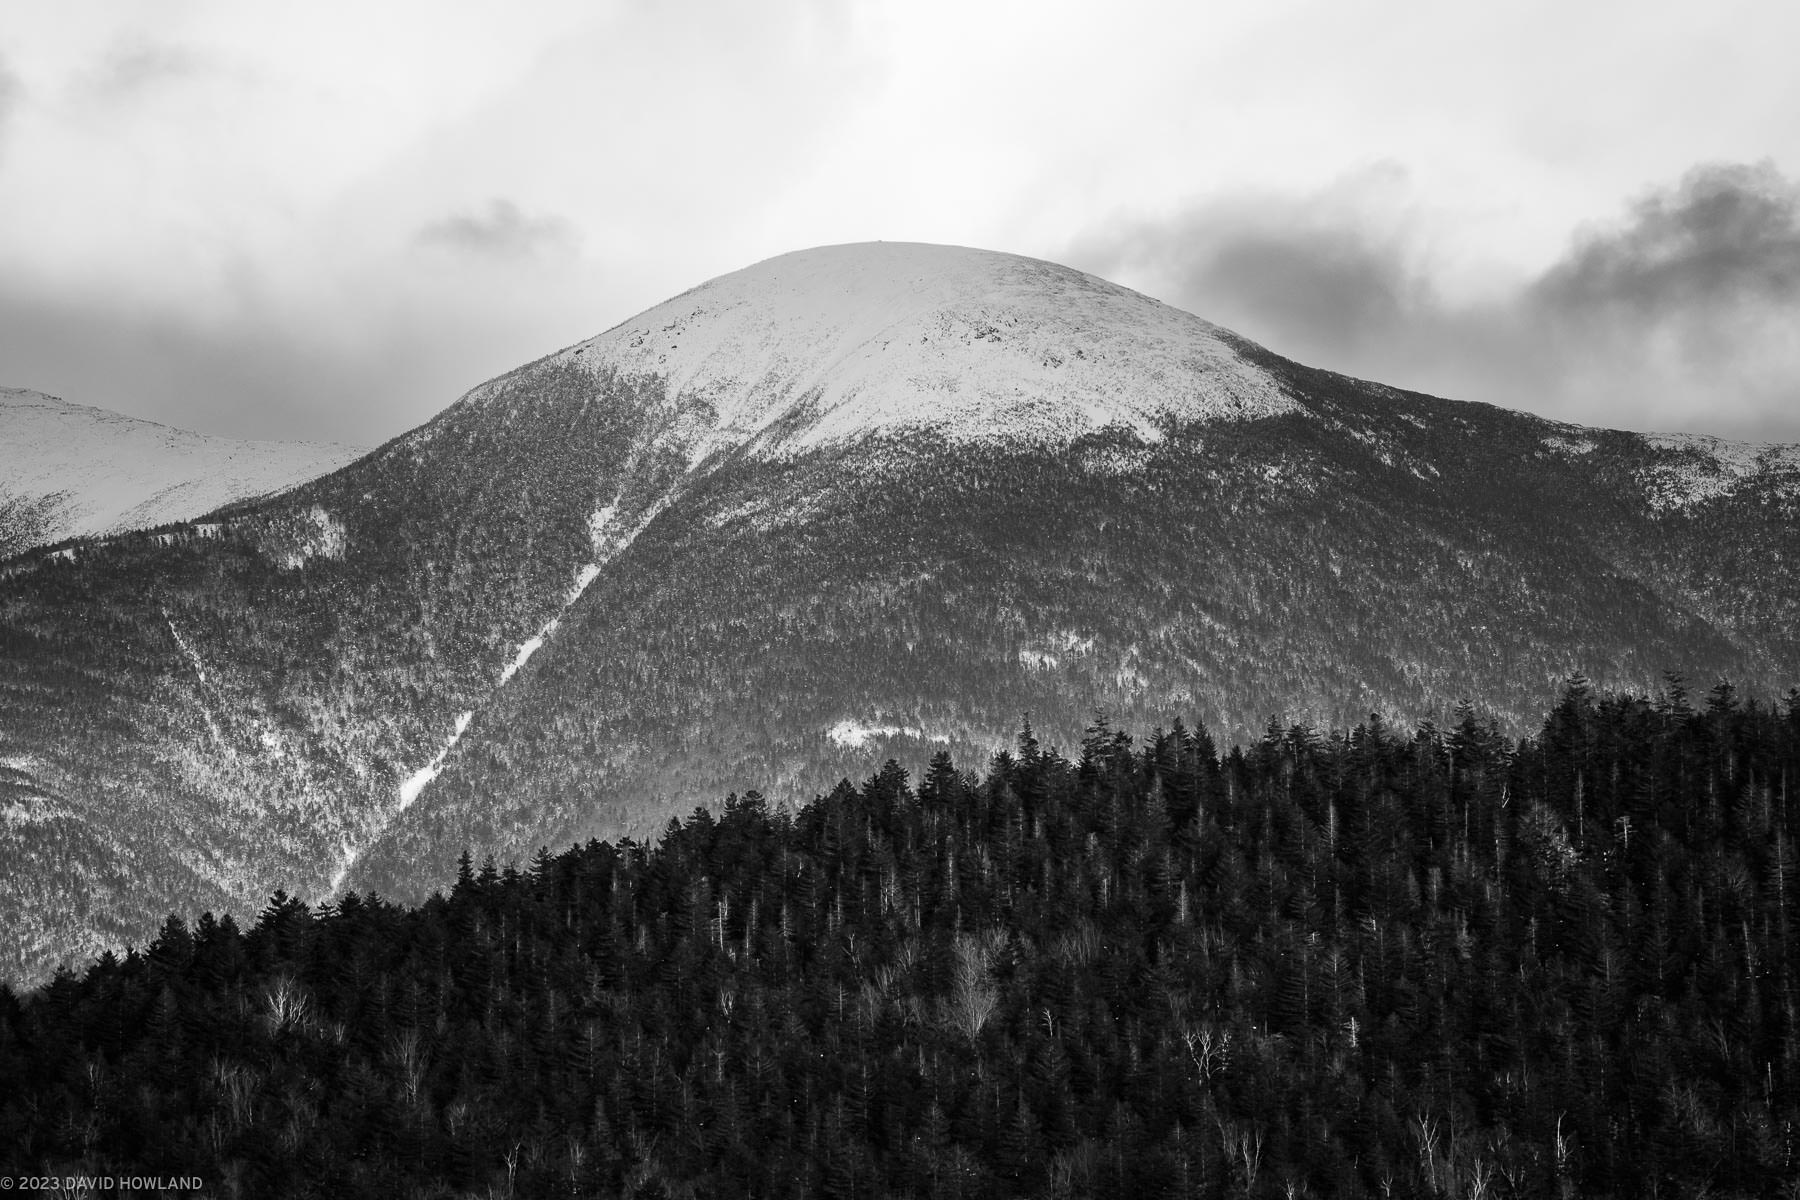 A black and white photo of snow-covered Mount Eisenhower in the Presidential mountain range of New Hampshire.